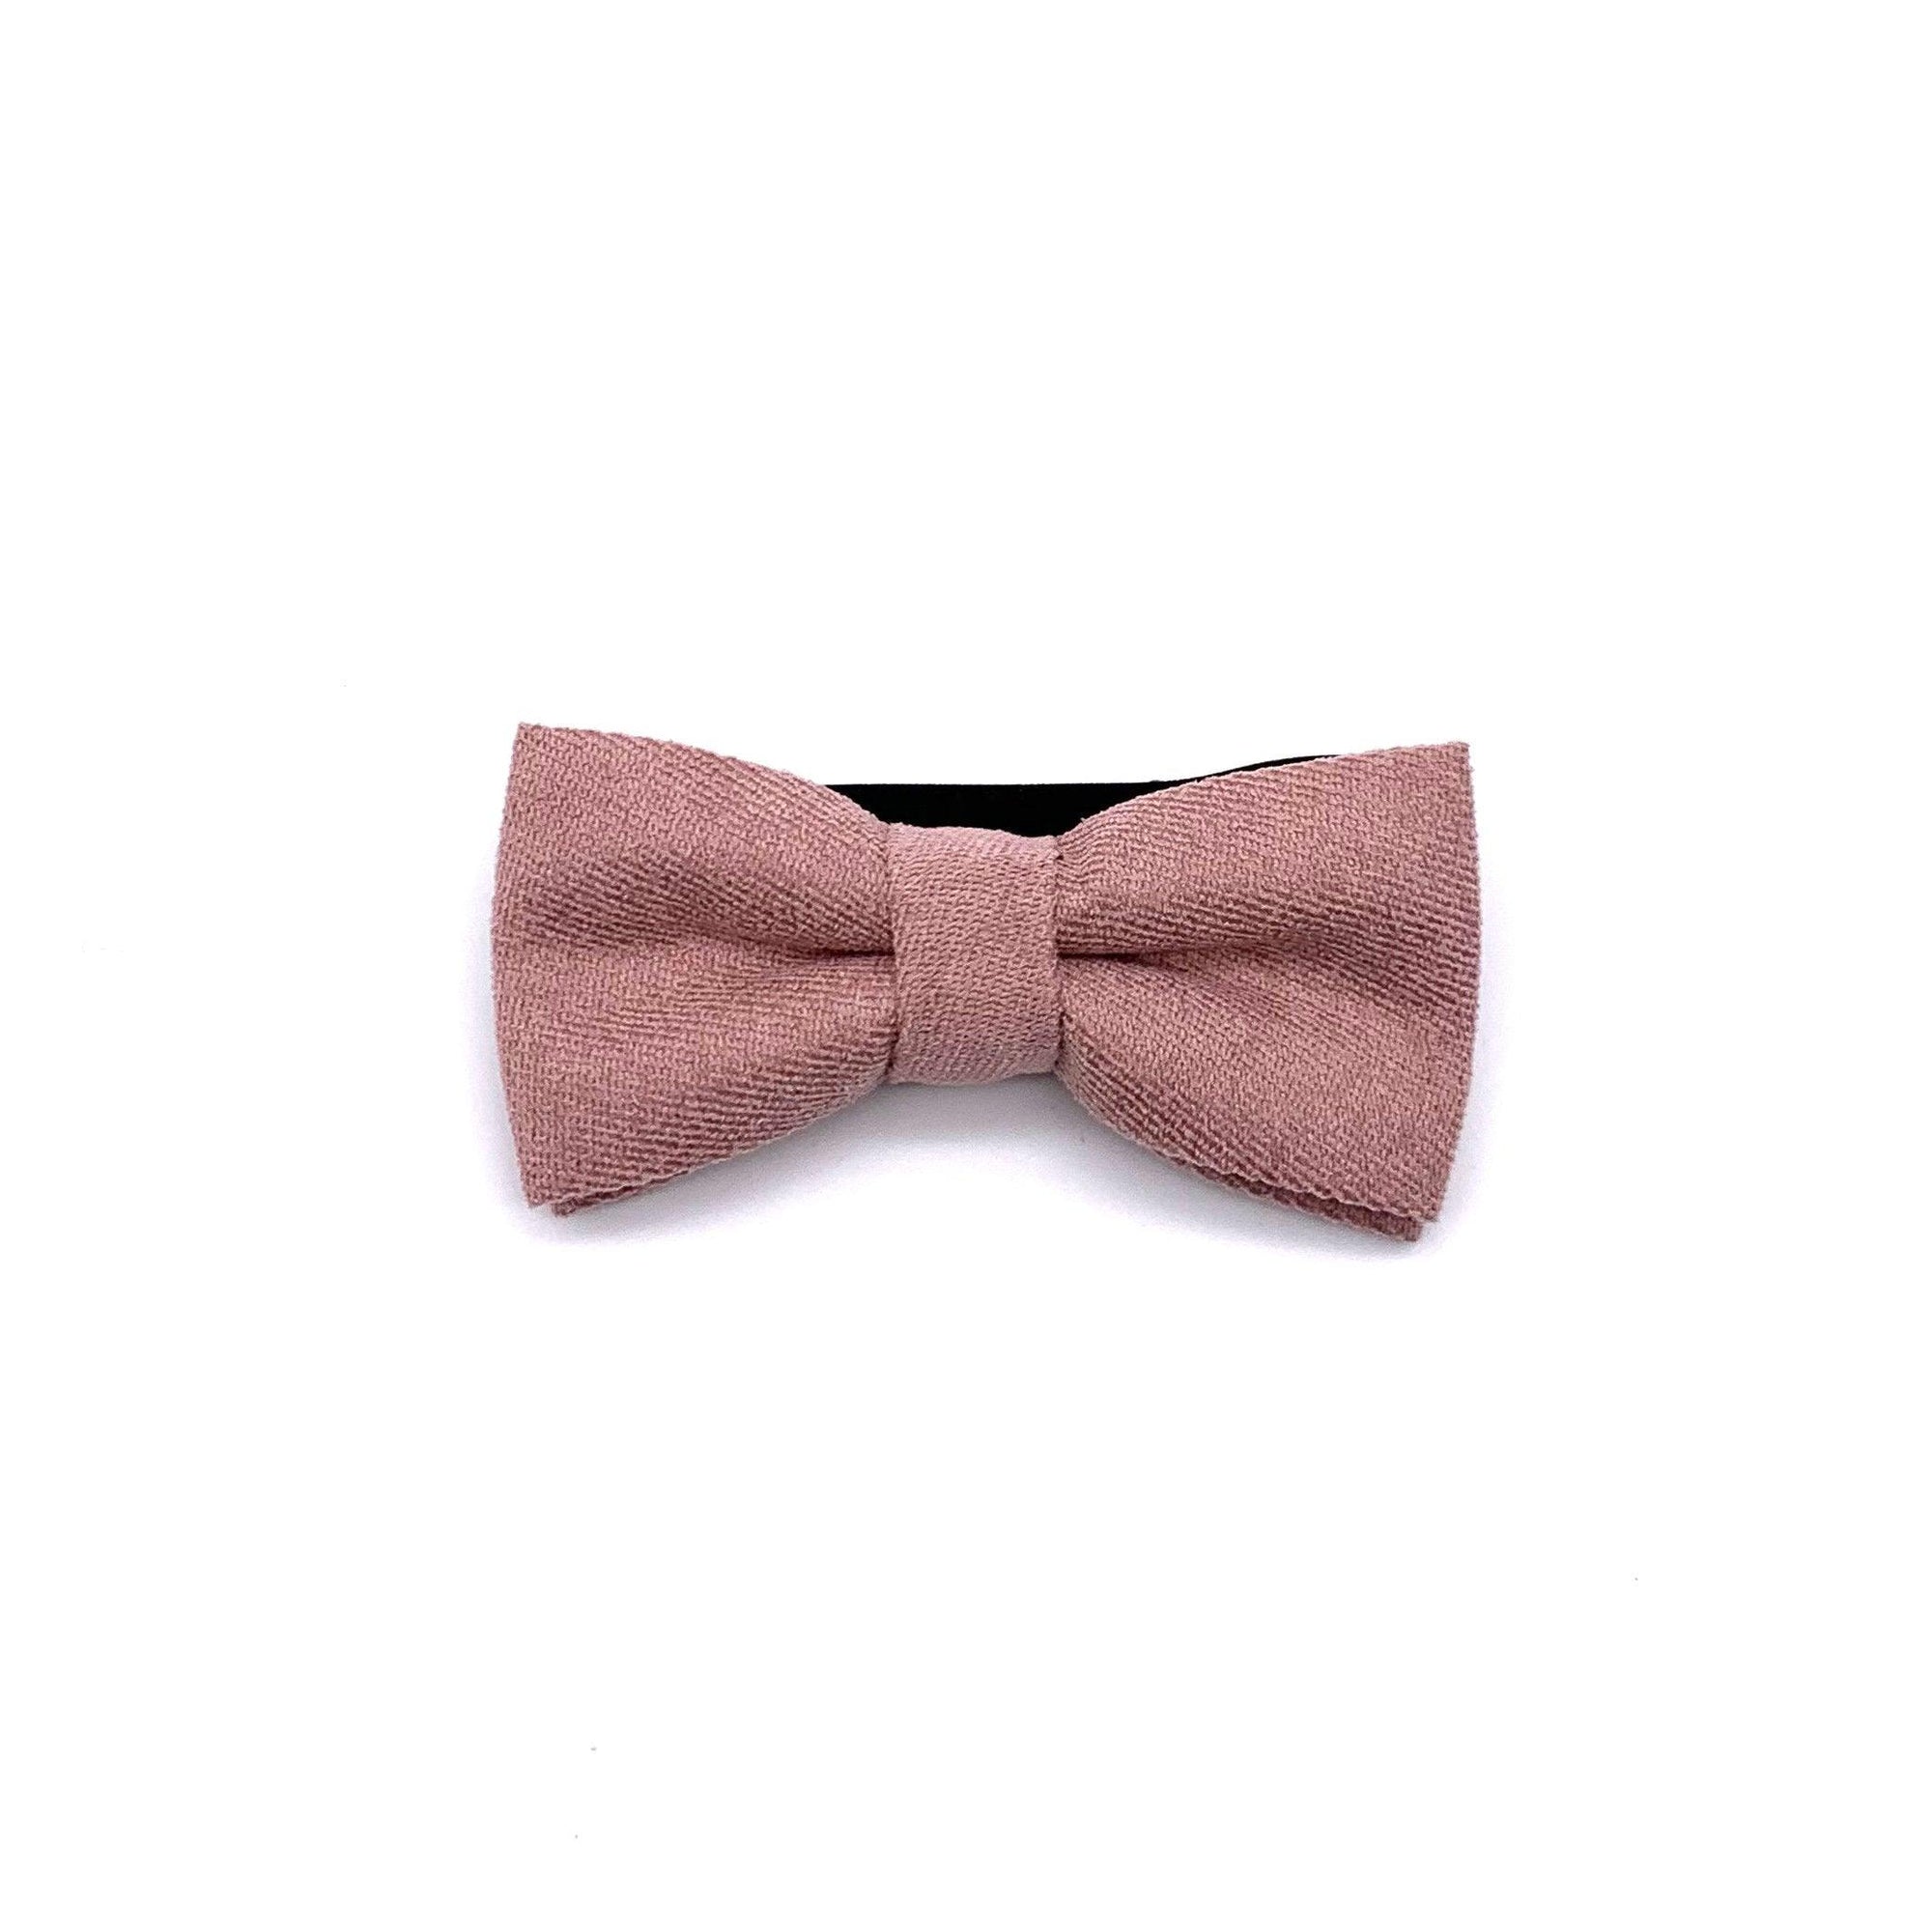 Kids Floral Baby Bow tie Mytieshop - ROSÉ-Kids Floral Baby Bow tie Color: Pink Strap is adjustablePre-Tied bowtieBow Tie 10.5 * 6CM Great for Prom Dinners Interviews Photo shoots Photo sessions Dates Wedding Attendant Ring Bearers Kid's Pink Bow Tie Fits toddlers and babies. Evabder baby ow tie toddler bow tie floral for wedding and events groom groomsmen flower bow tie mytieshop ring bearer page boy bow tie white bow tie white and blue tie kids bowtie floral Adjustable wedding attire for toddle